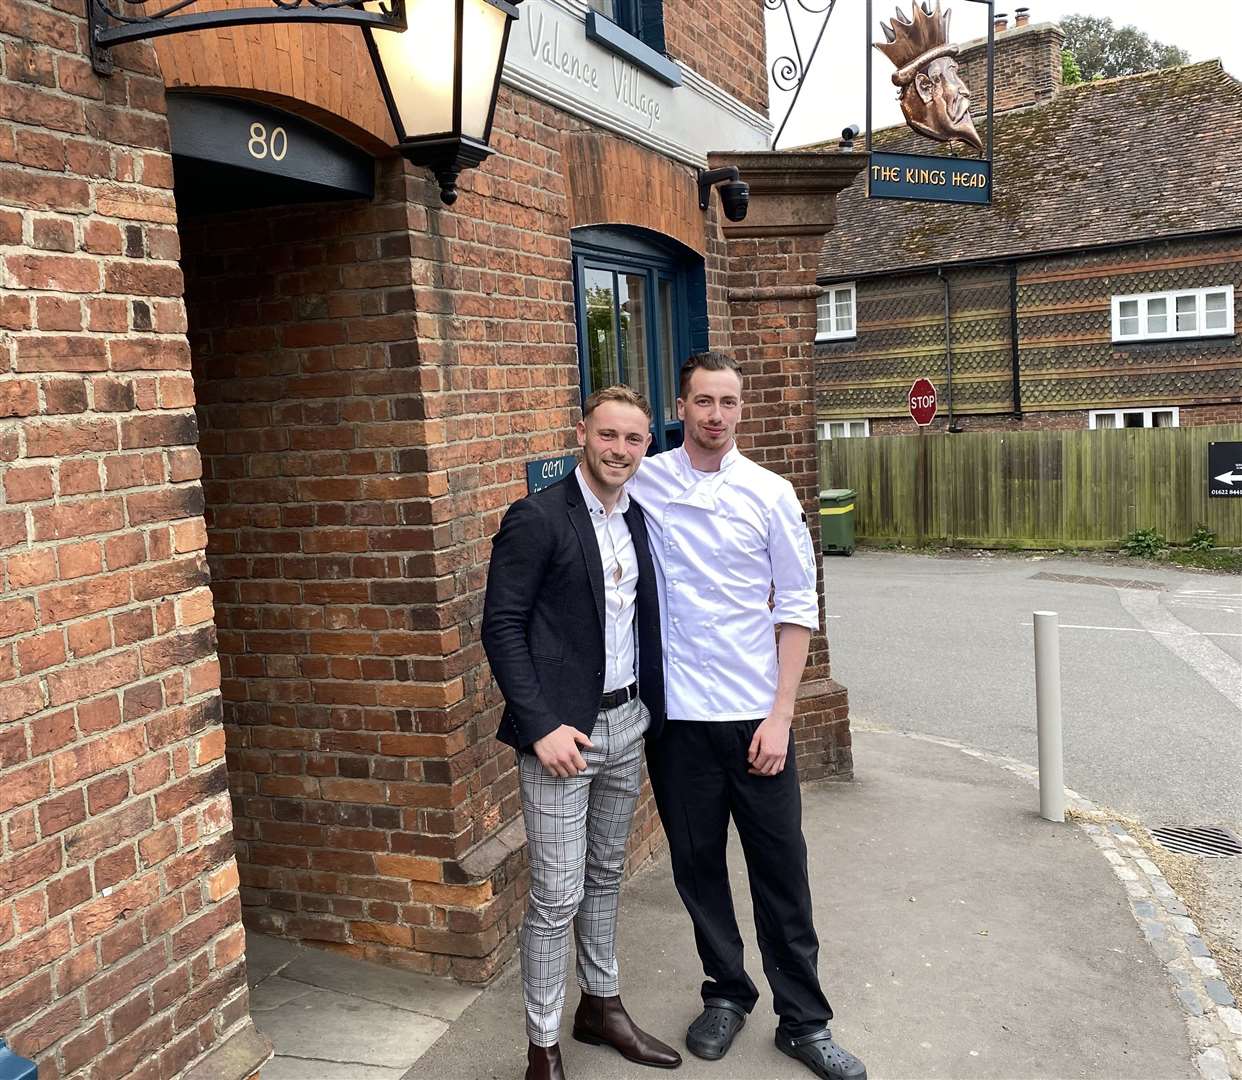 Zak Warwood and Joe Woodfine, owners of the King's Head in Sutton Valence